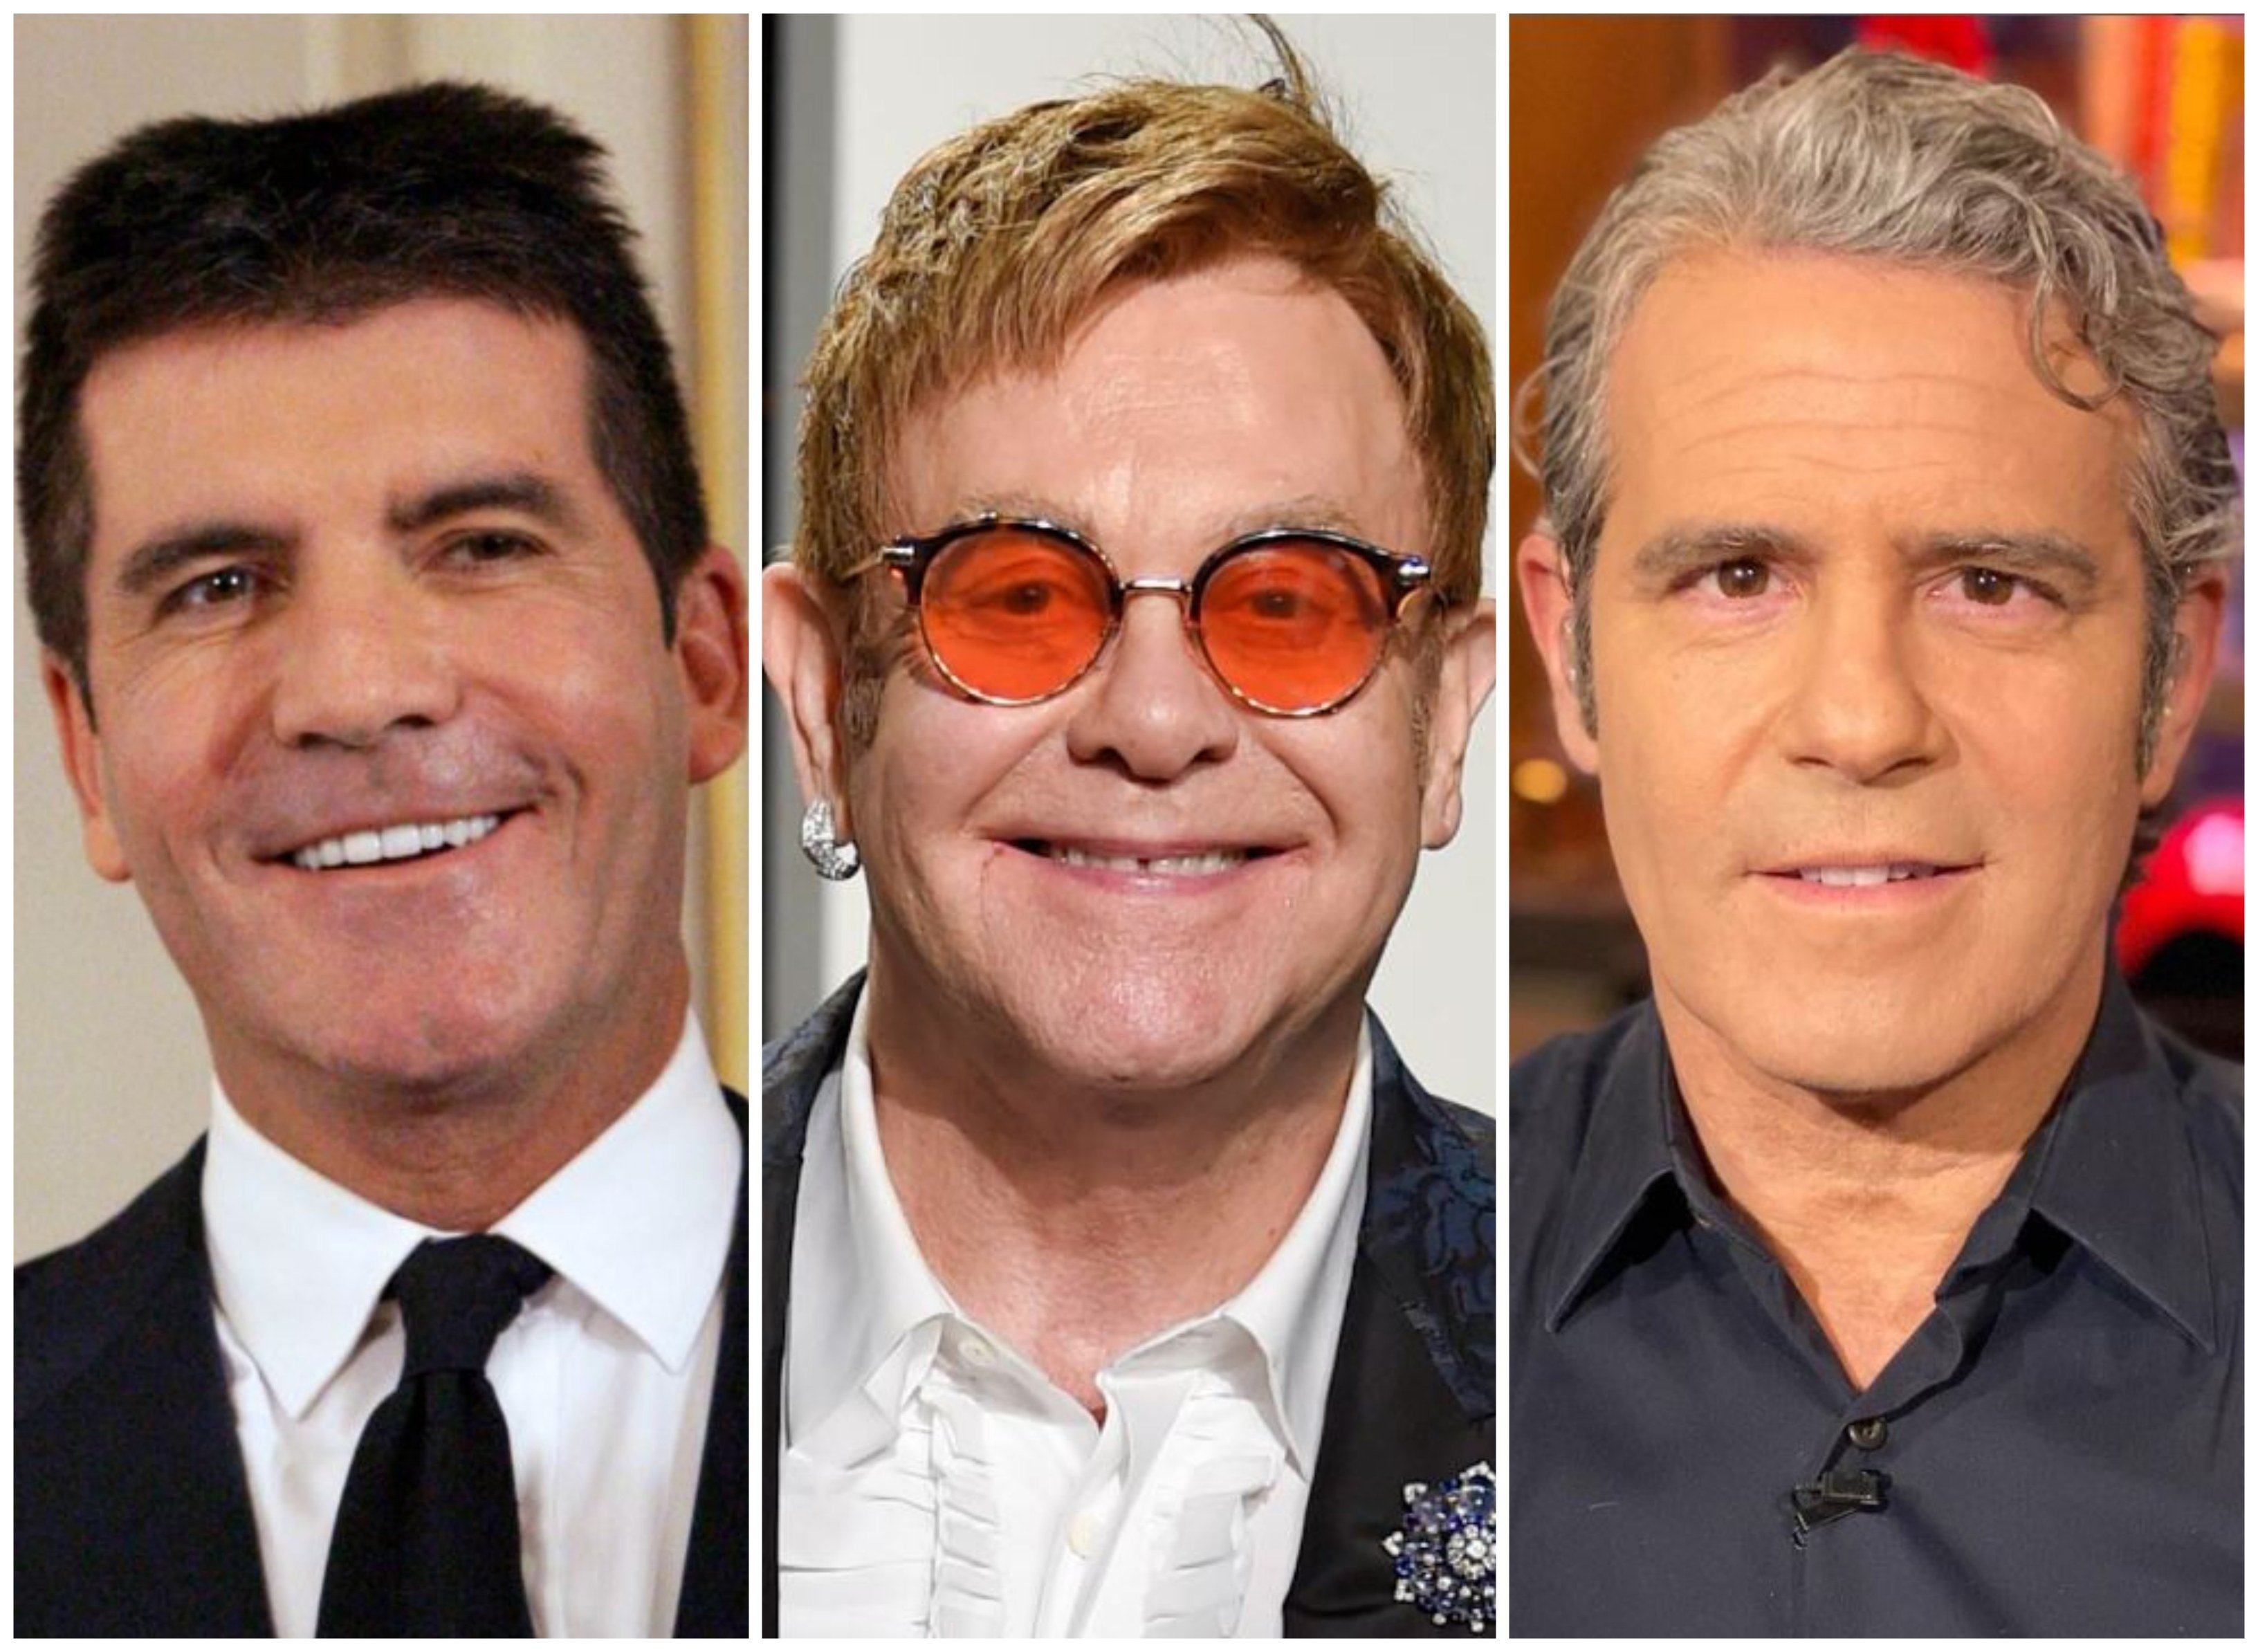 Simon Cowell, Elton John, Andy Cohen and 11 other celebrities who became first-time dads after 50. Photos: AP, @bravoandy/Instagram